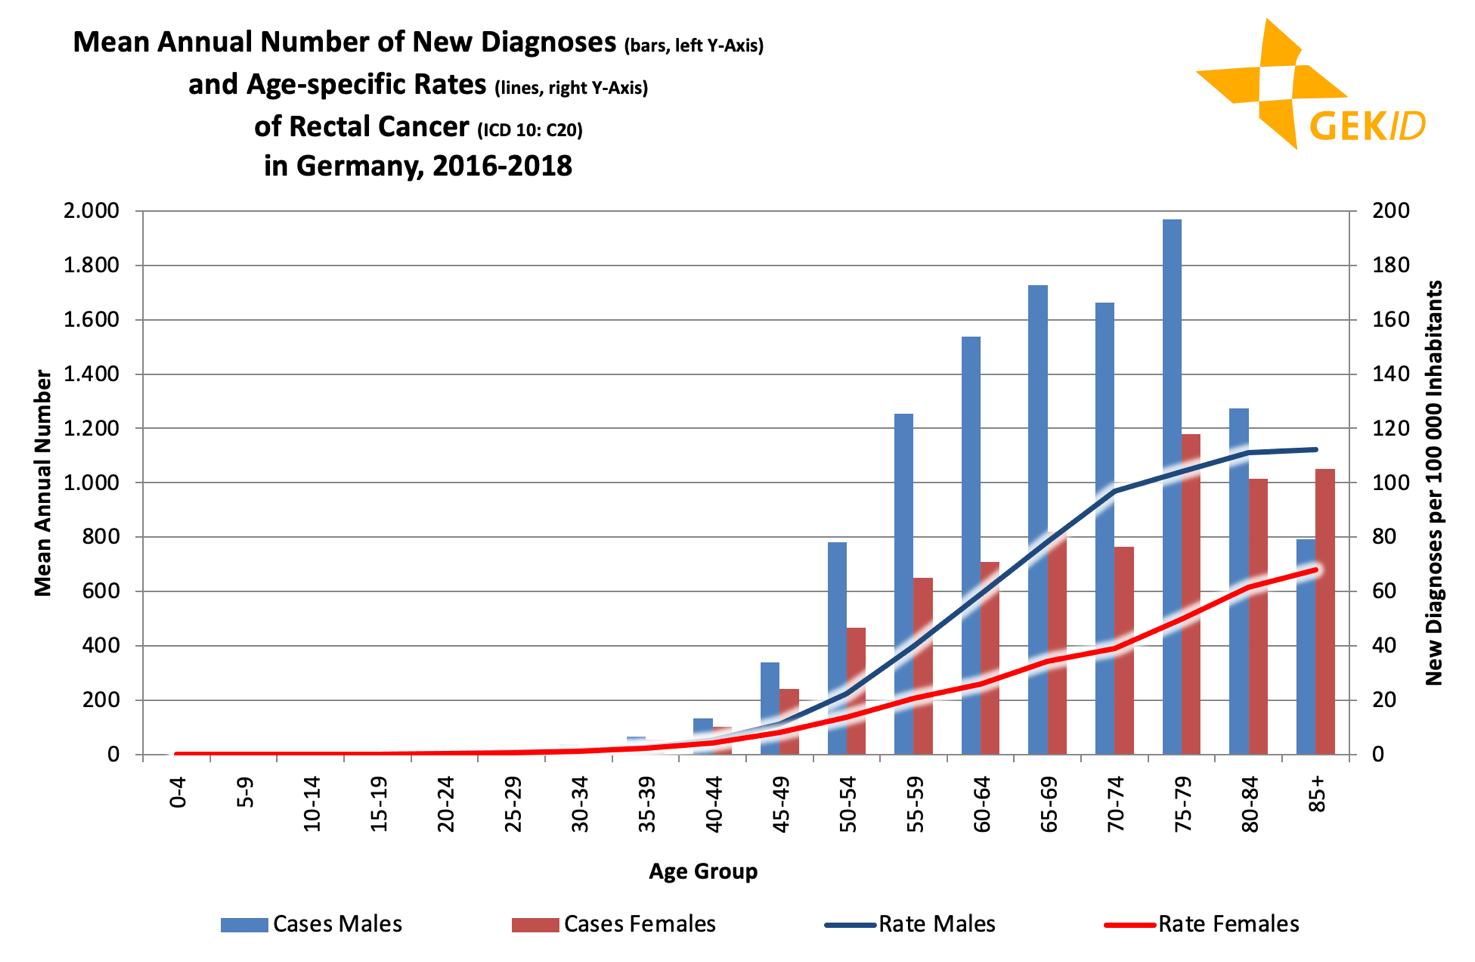 Age distribution of the incidence of malignant neoplasms of the rectum (ICD 10: C20) - age-specific case numbers and rates 3